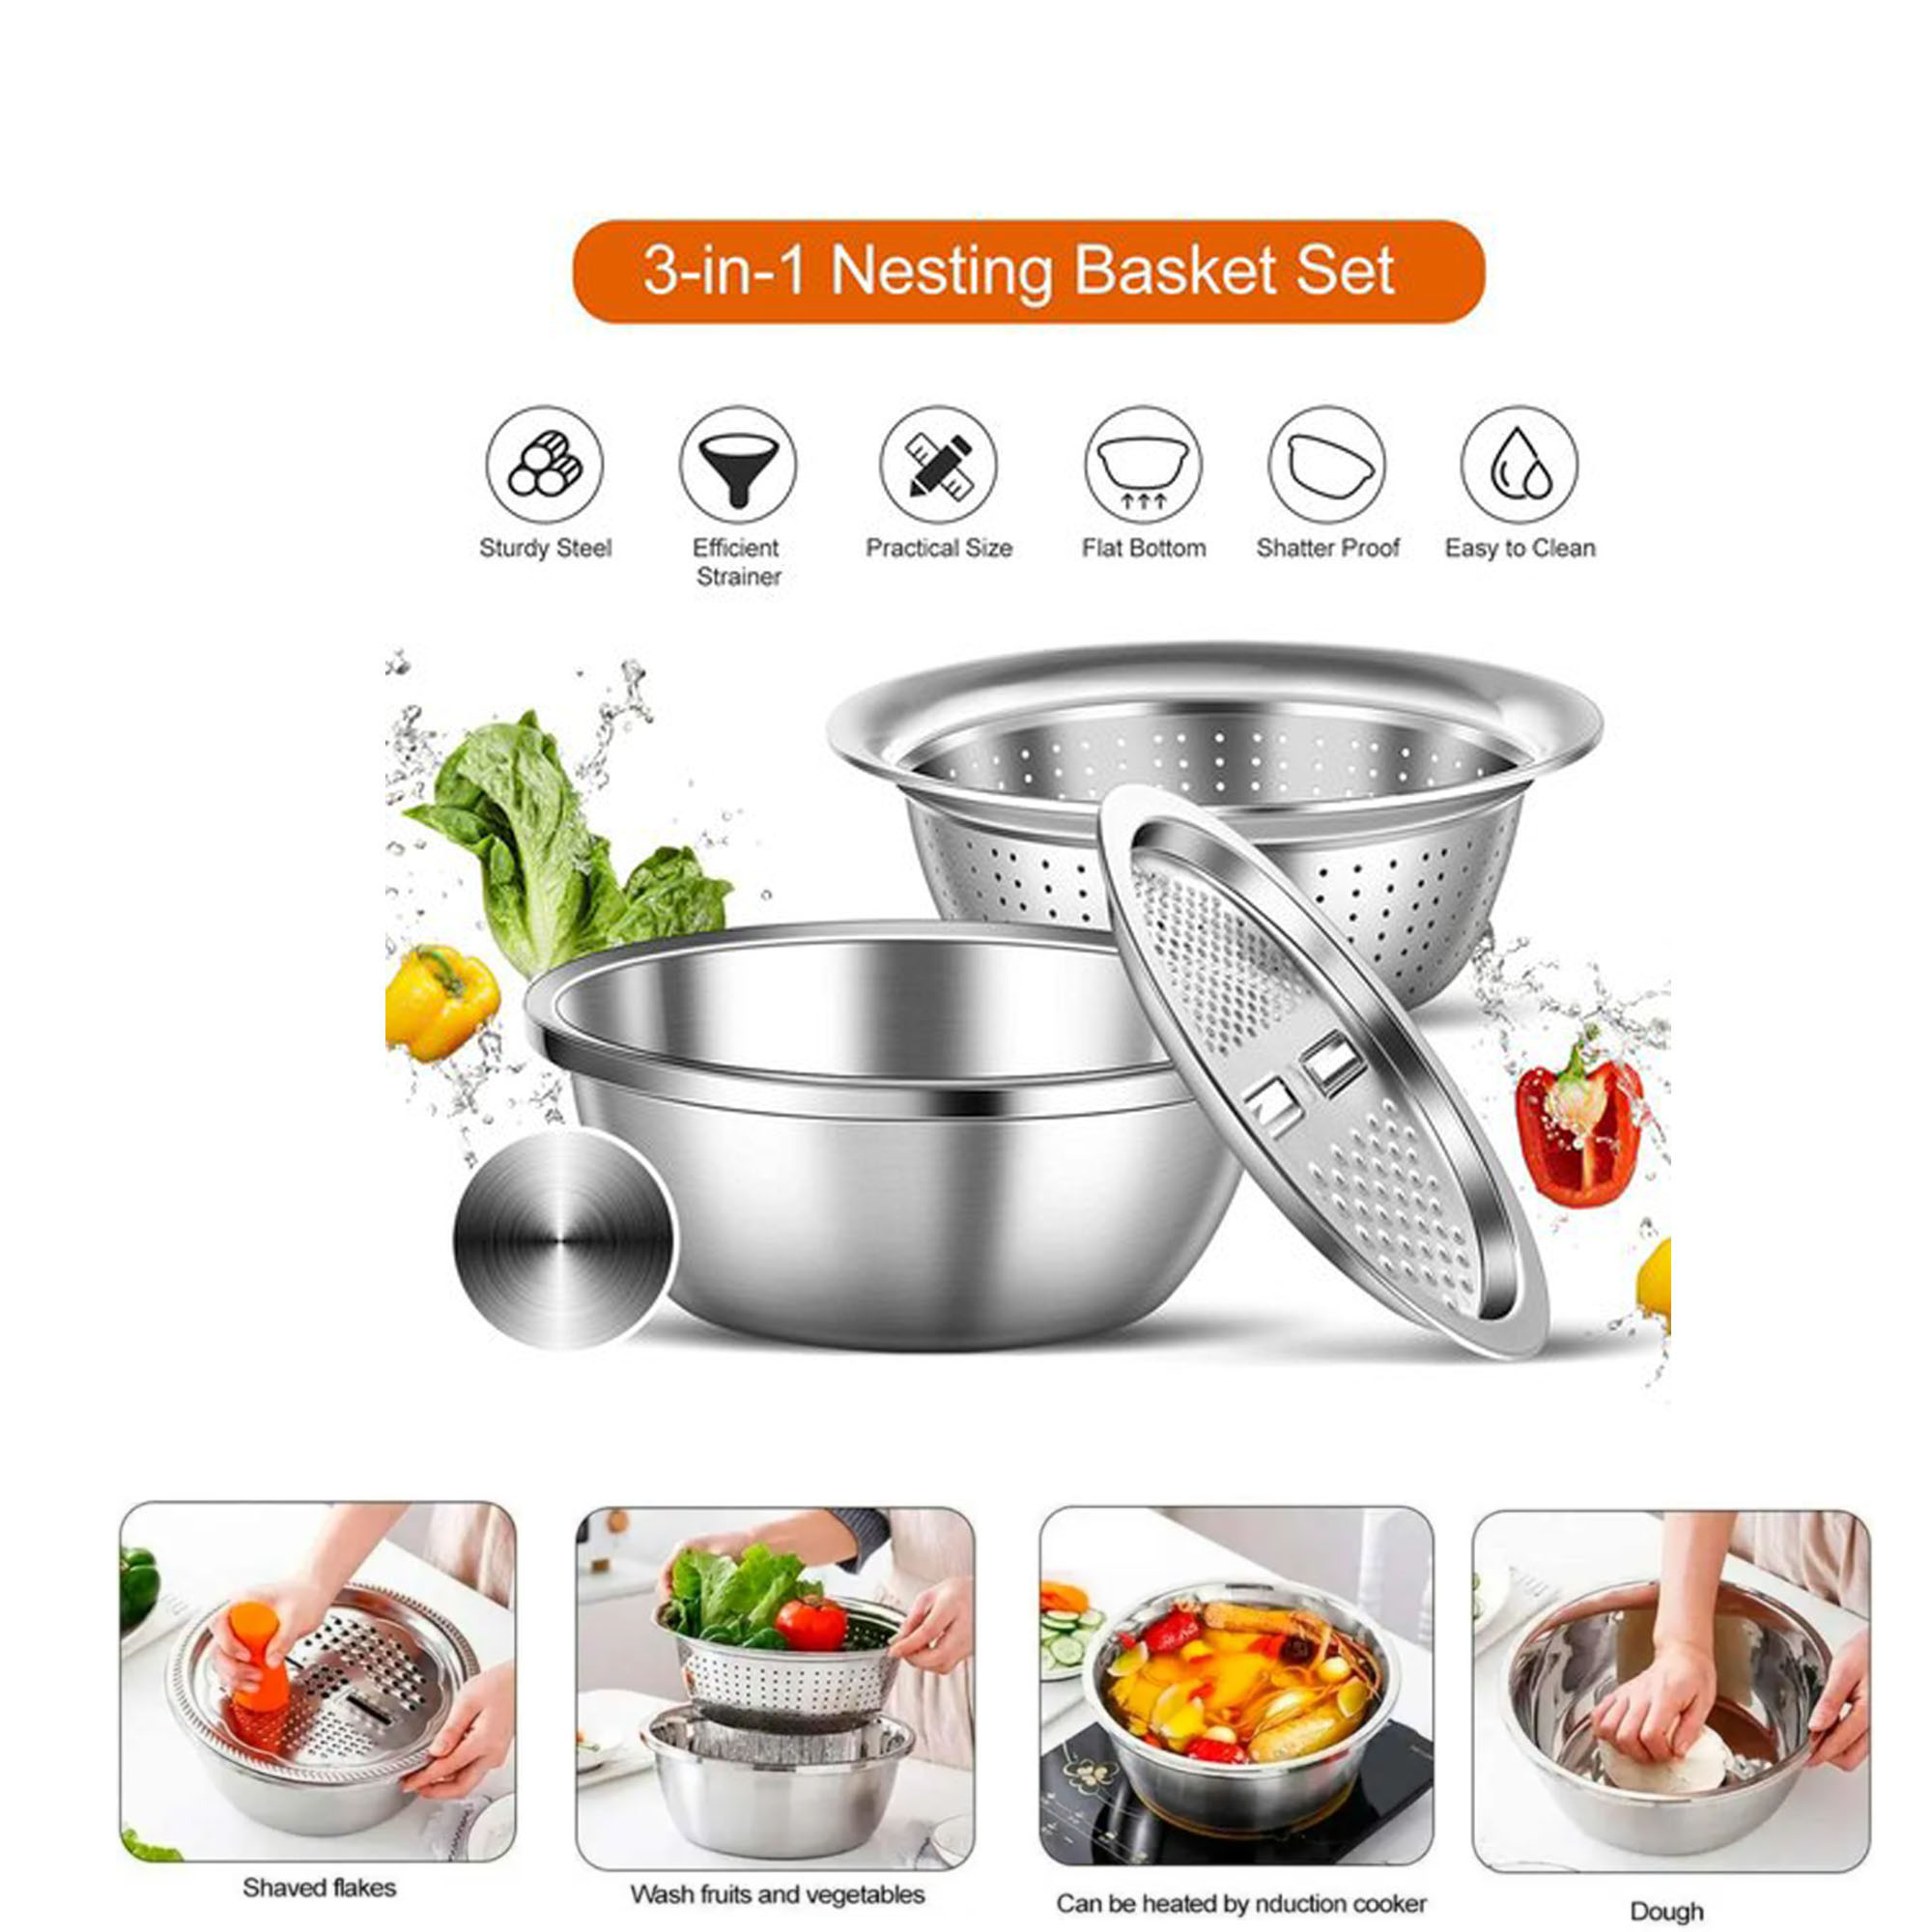 https://nephot.com/wp-content/uploads/2023/01/New-Stainless-Steel-Basin-Vegetable-Cutter-with-Drain-Basket-3PCS-Vegetable-Washing-Bowl_00.jpg